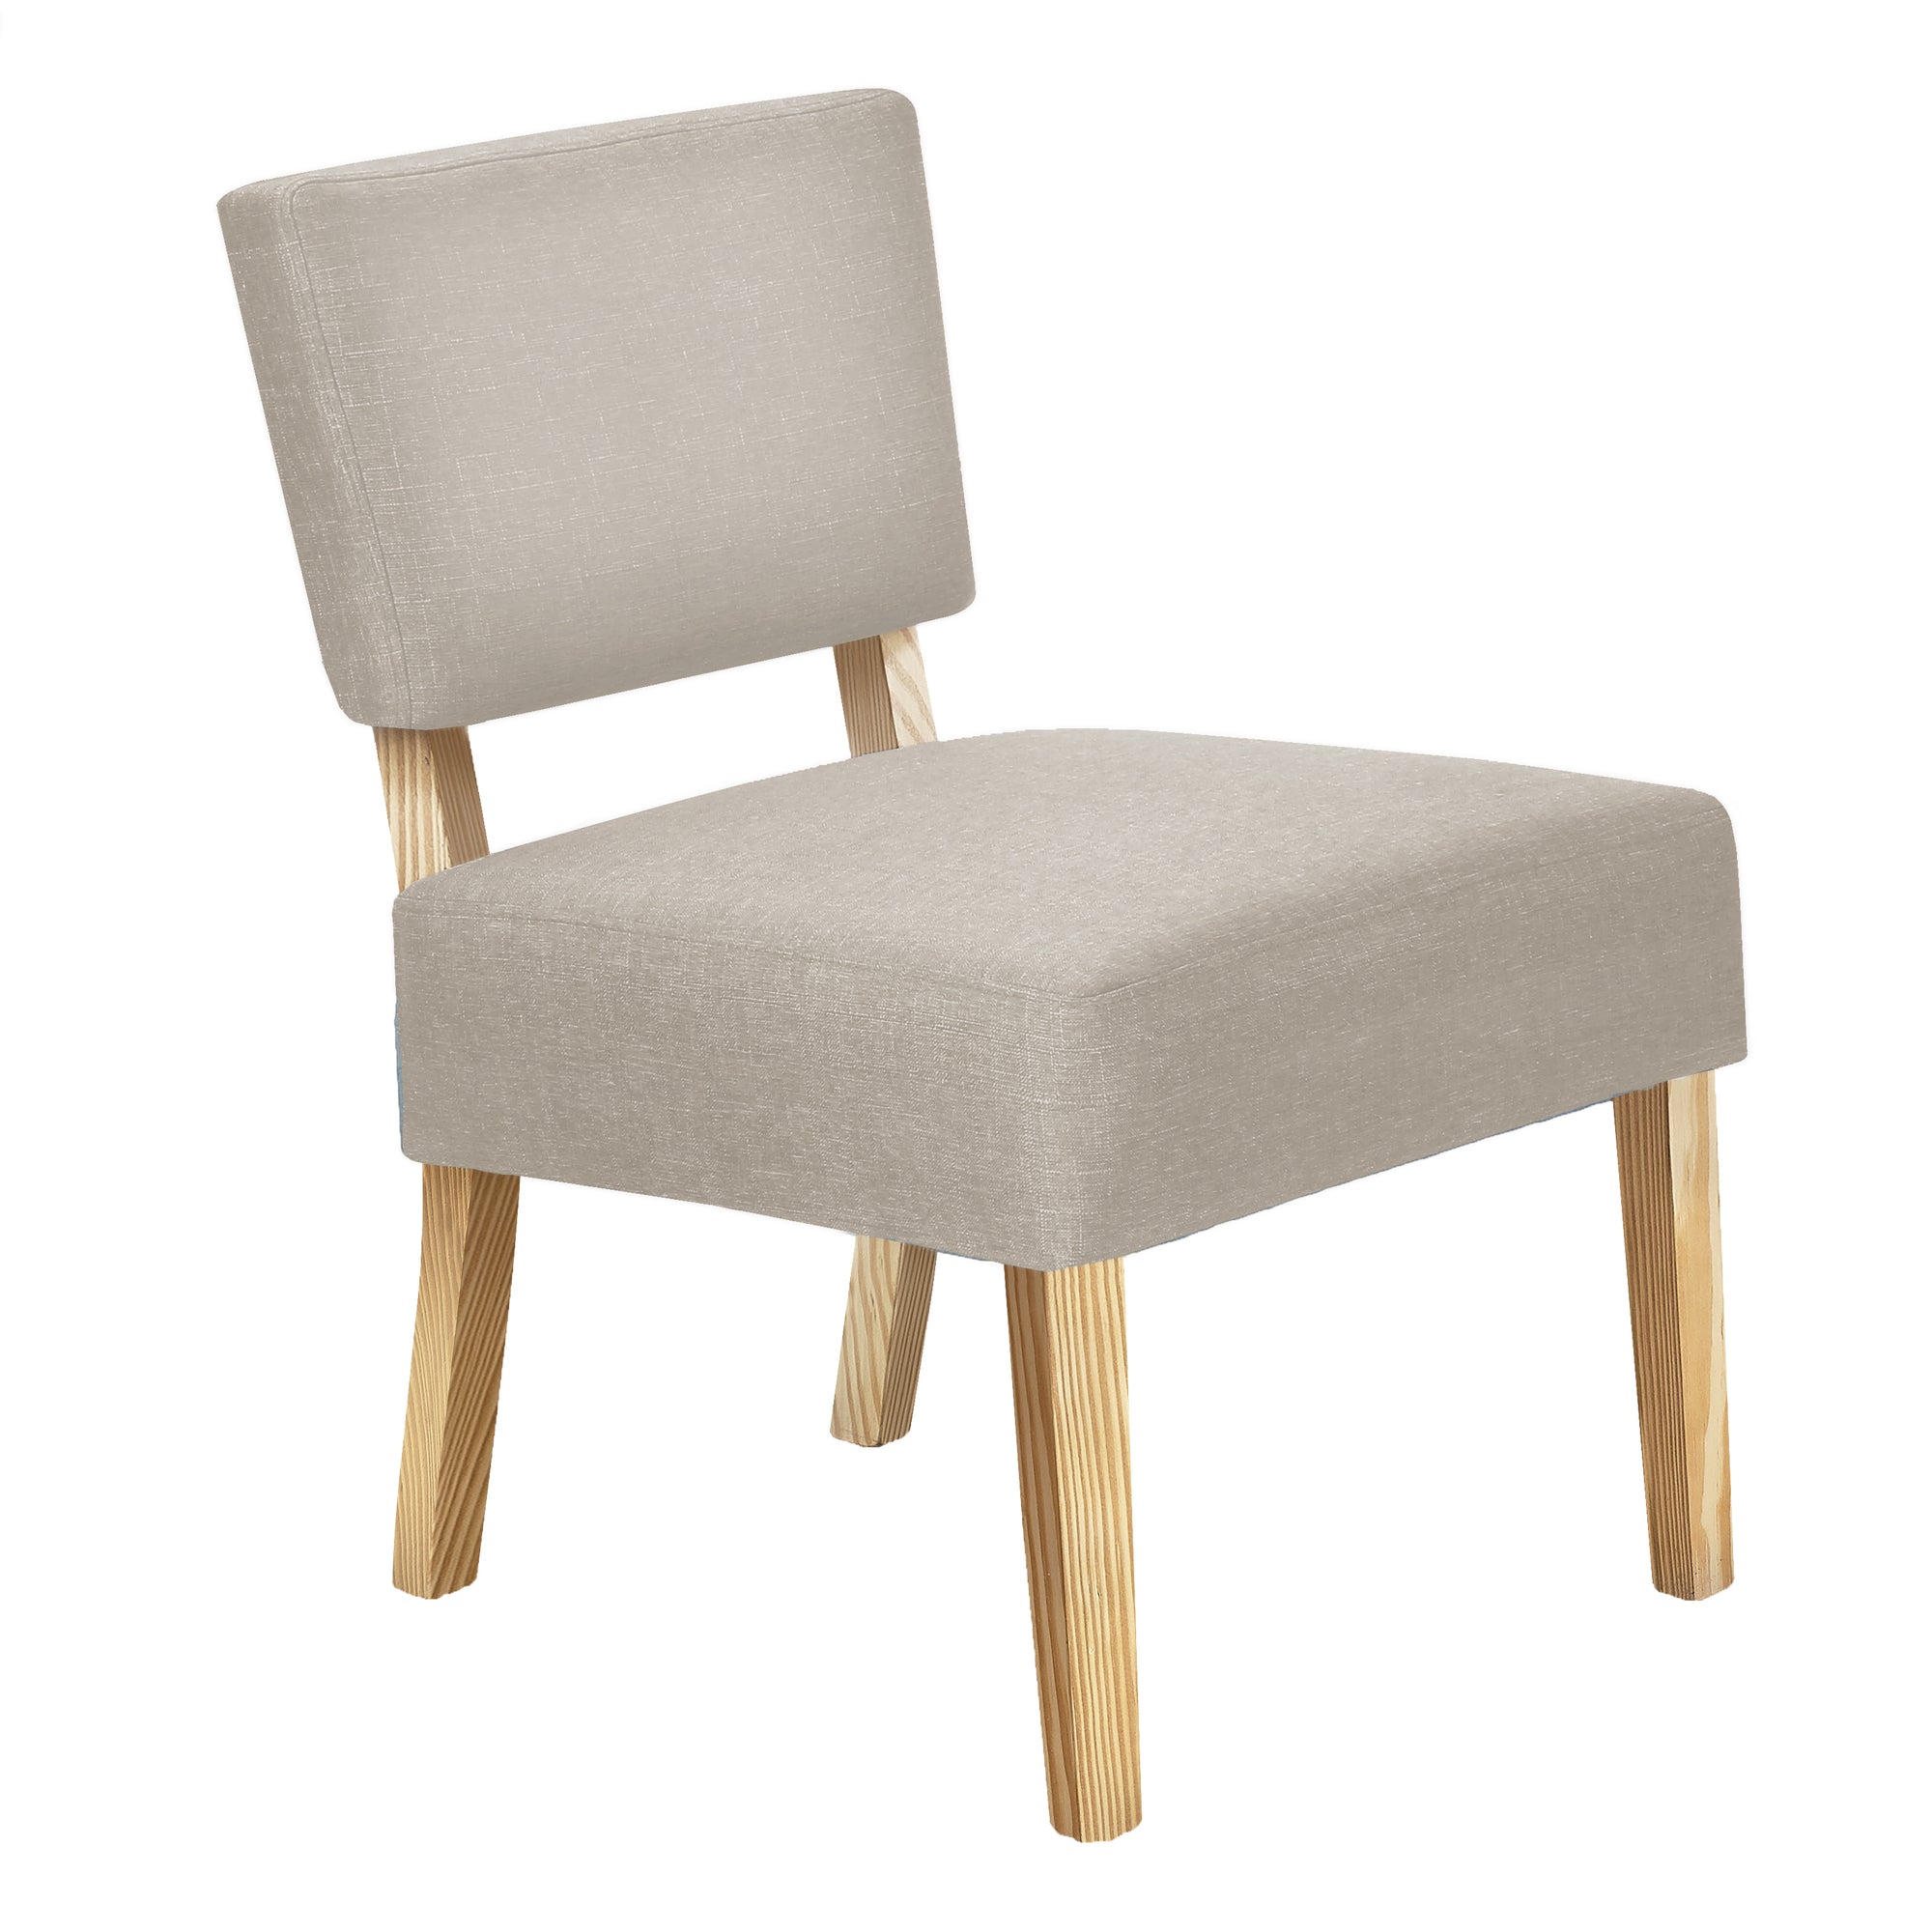 MN-998272    Accent Chair, Armless, Fabric, Living Room, Bedroom, Fabric, Solid Wood Legs, Taupe, Black, Contemporary, Modern